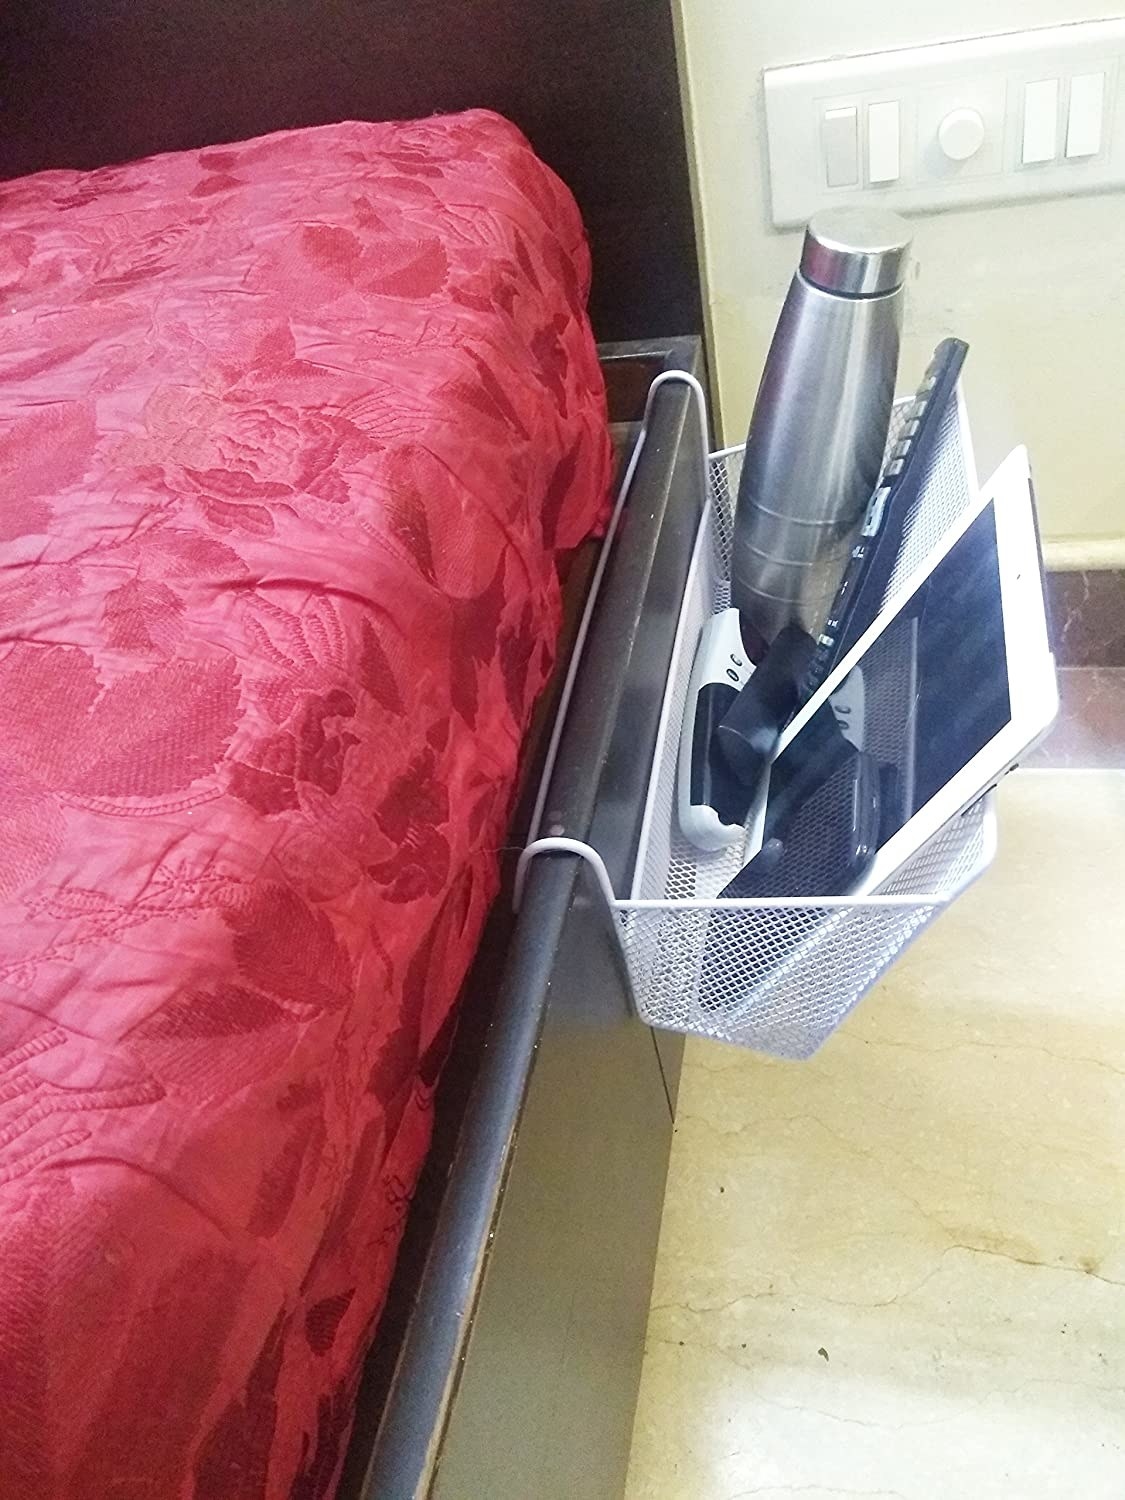 A bedside caddy with things in it